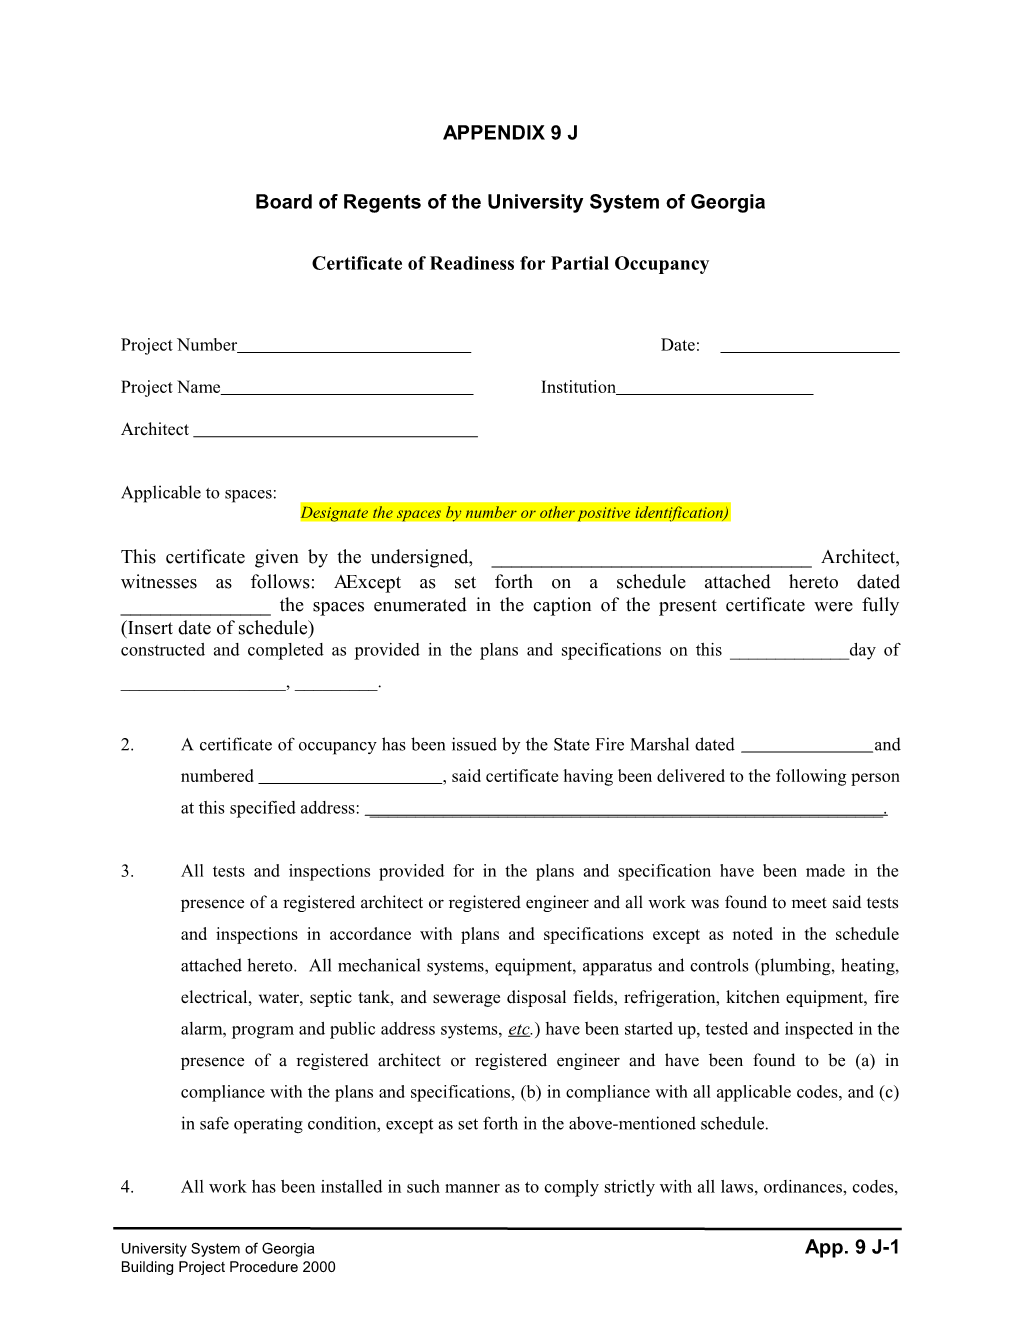 Board of Regents of the University System of Georgia s3